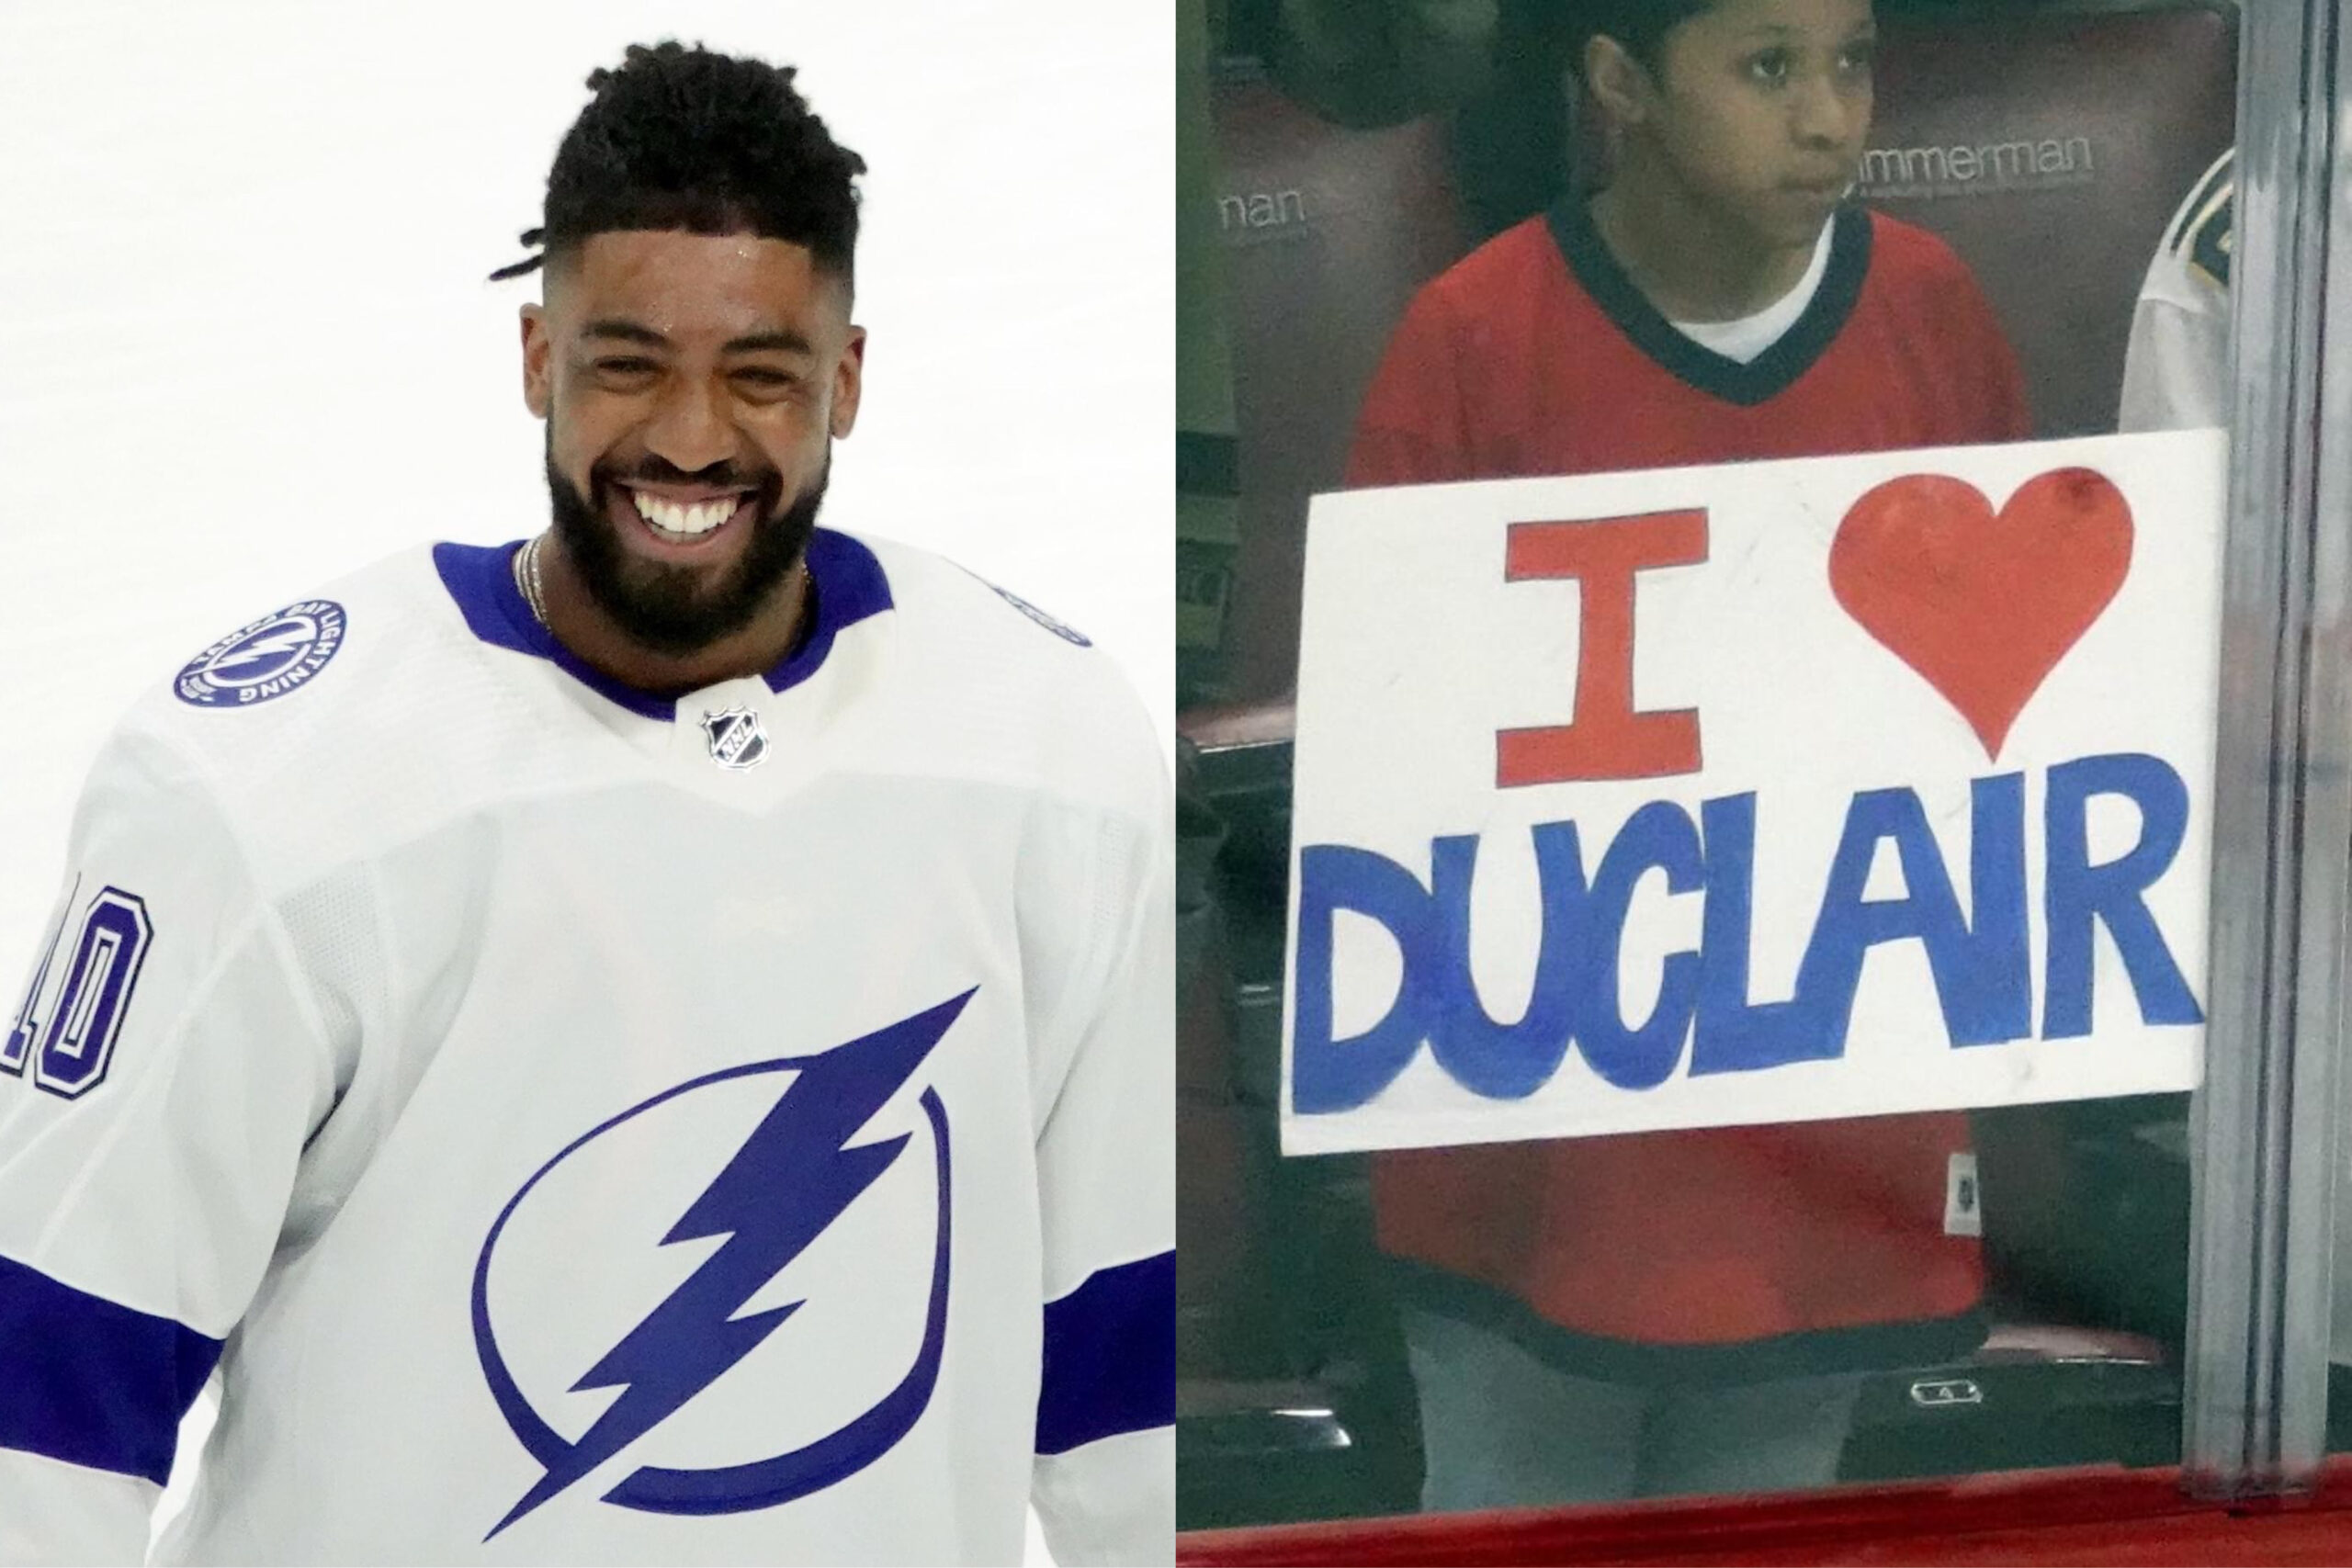 Florida Panthers Anthony Duclair